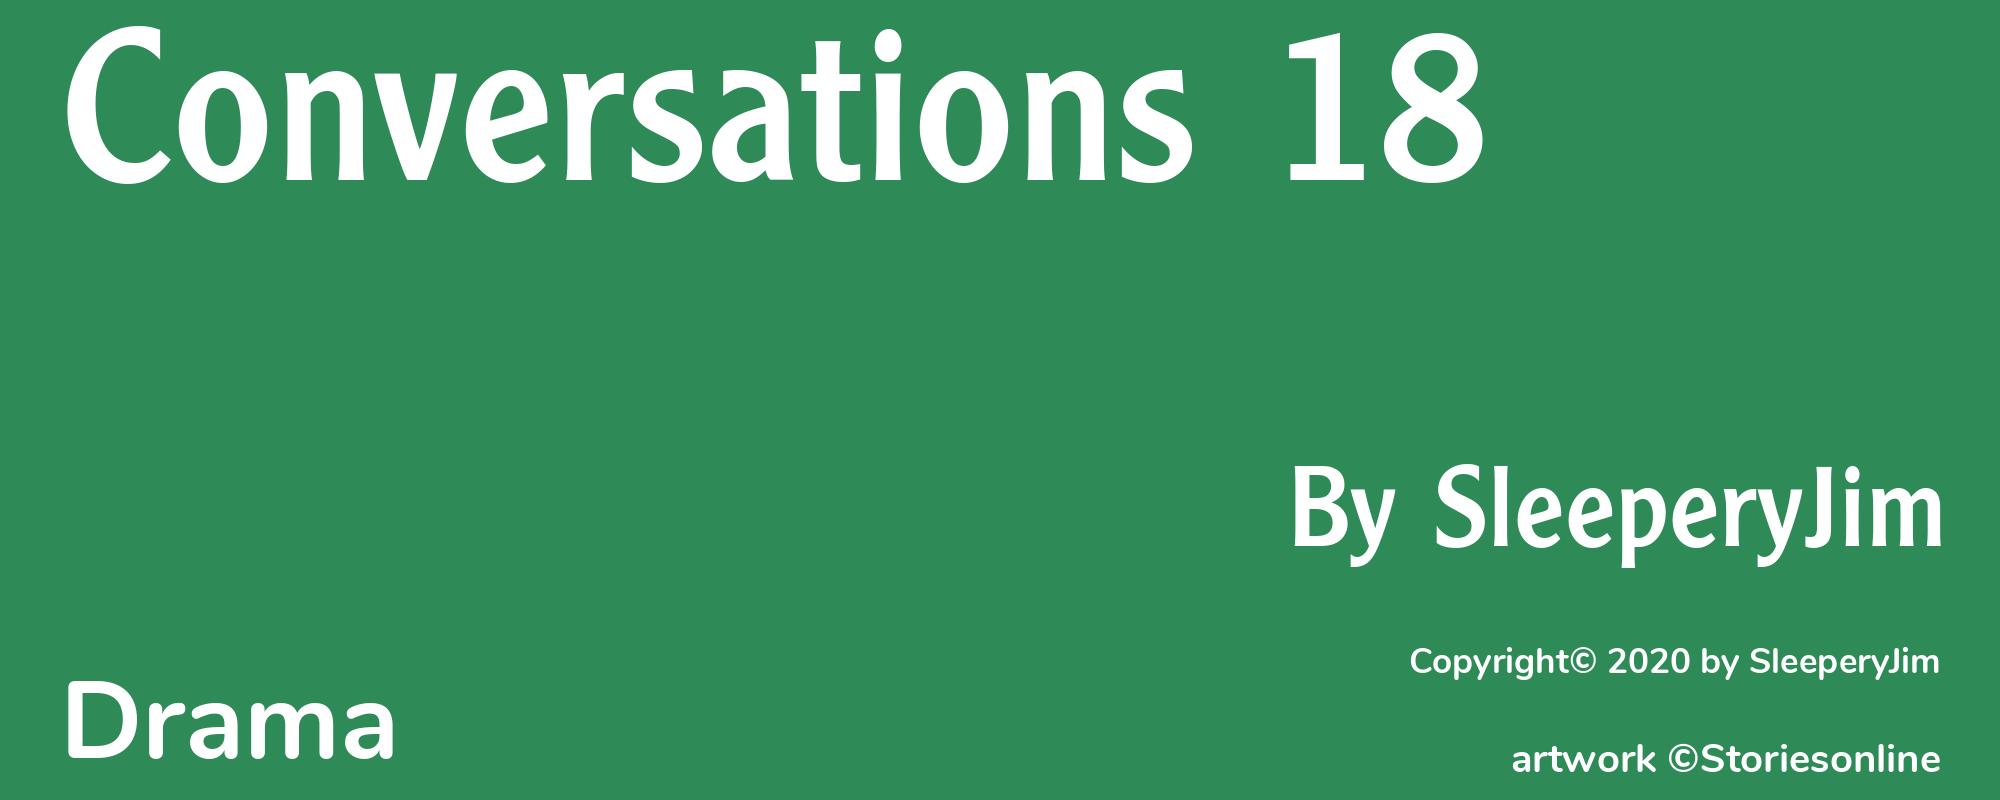 Conversations 18 - Cover